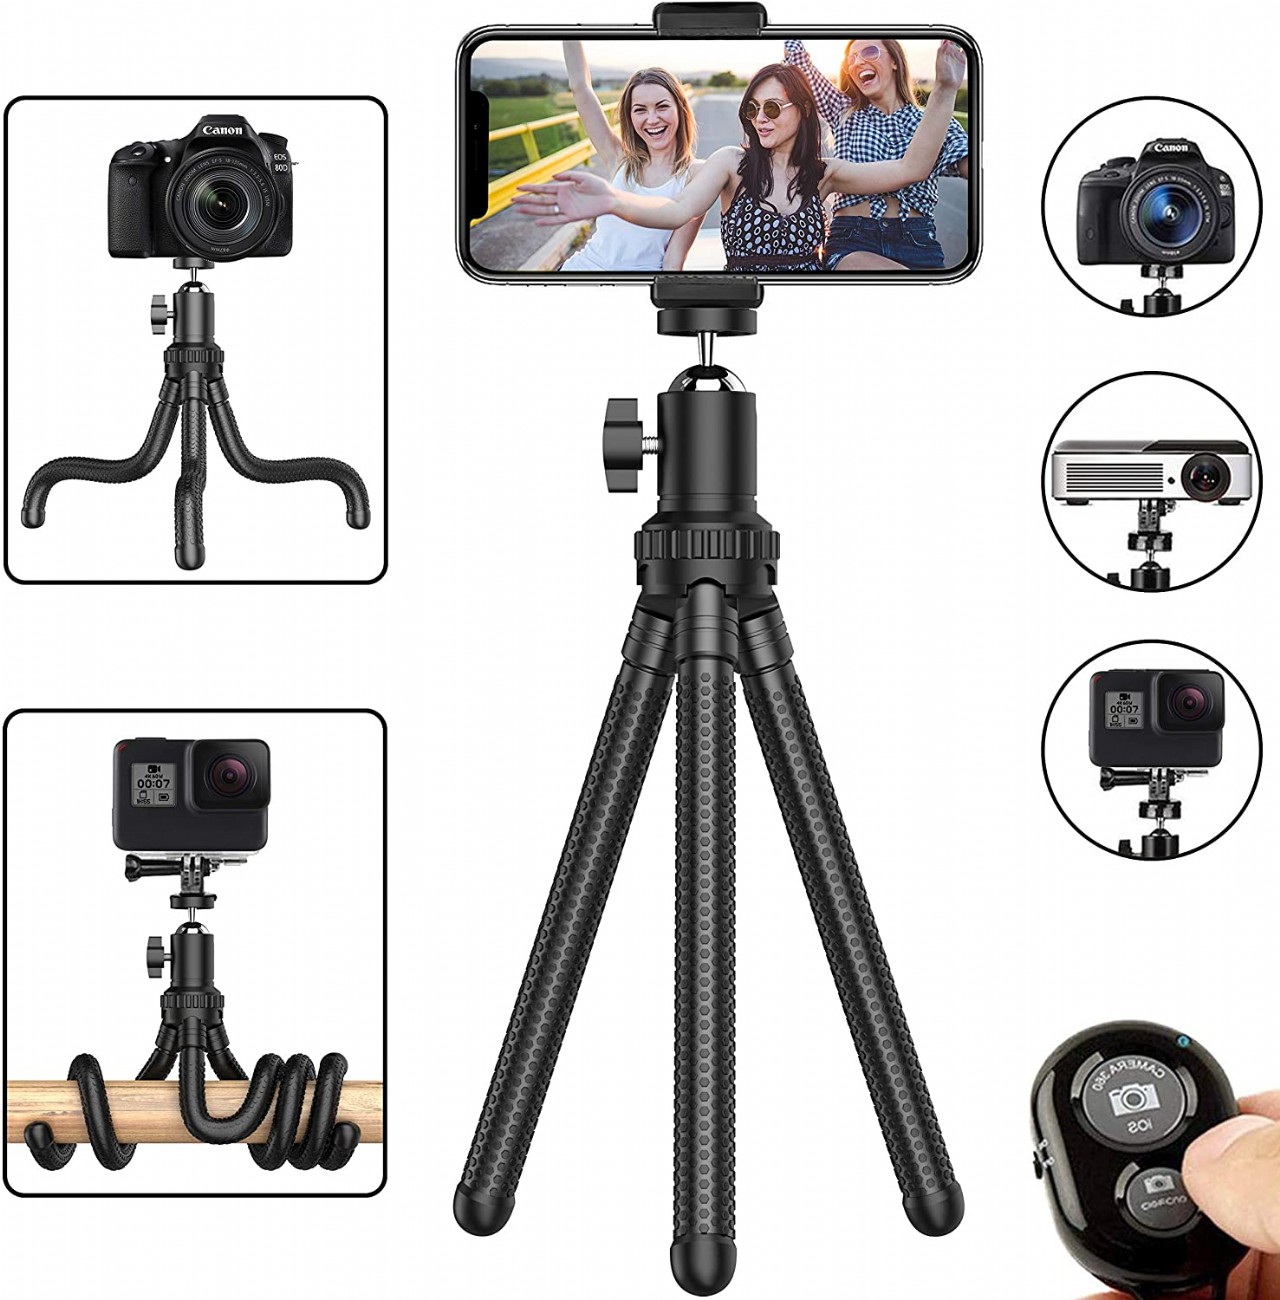 Phone Tripod, Portable Cell Phone Camera Tripod Stand with Wireless Remote, Flexible Tripod Stand